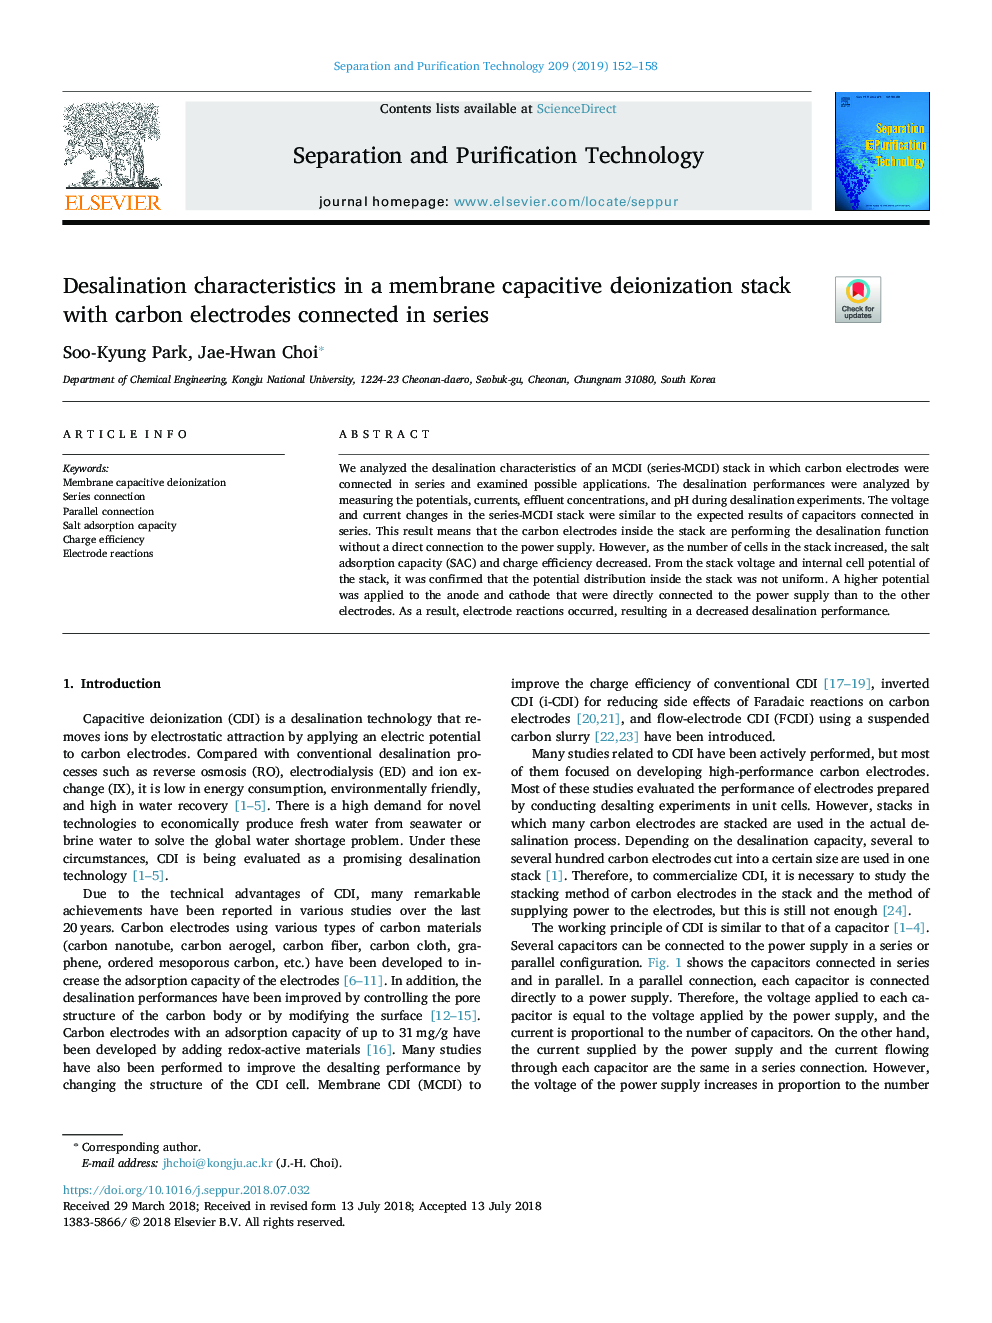 Desalination characteristics in a membrane capacitive deionization stack with carbon electrodes connected in series